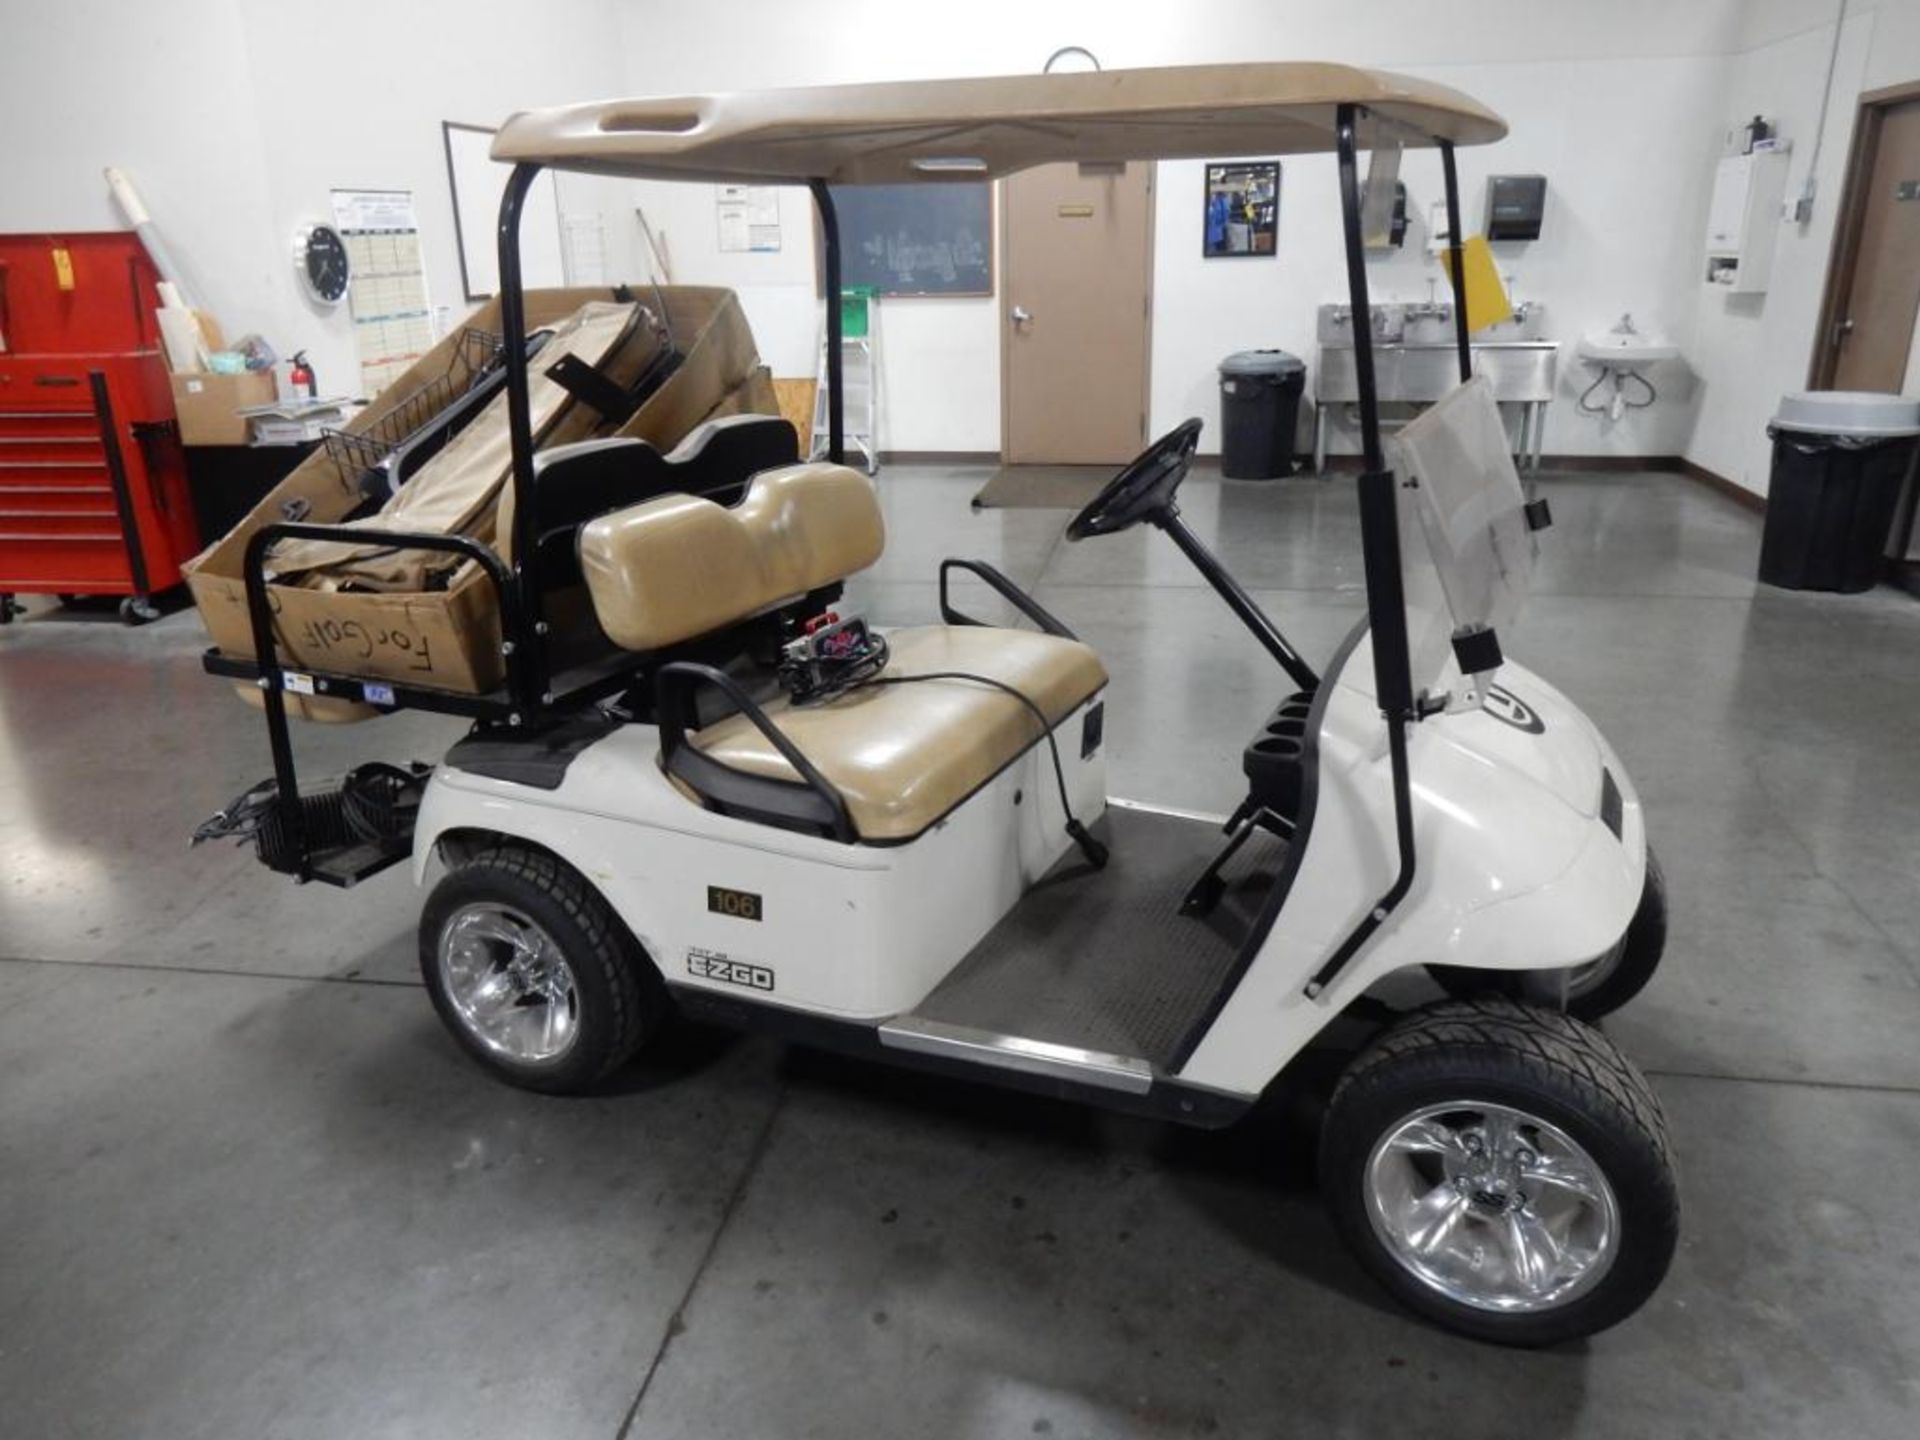 E-Z-GO GOLF CART, CANOPY, REAR FLIP SEAT, MAG WHEELS, WINDSHIELD, CHARGER - Image 2 of 6